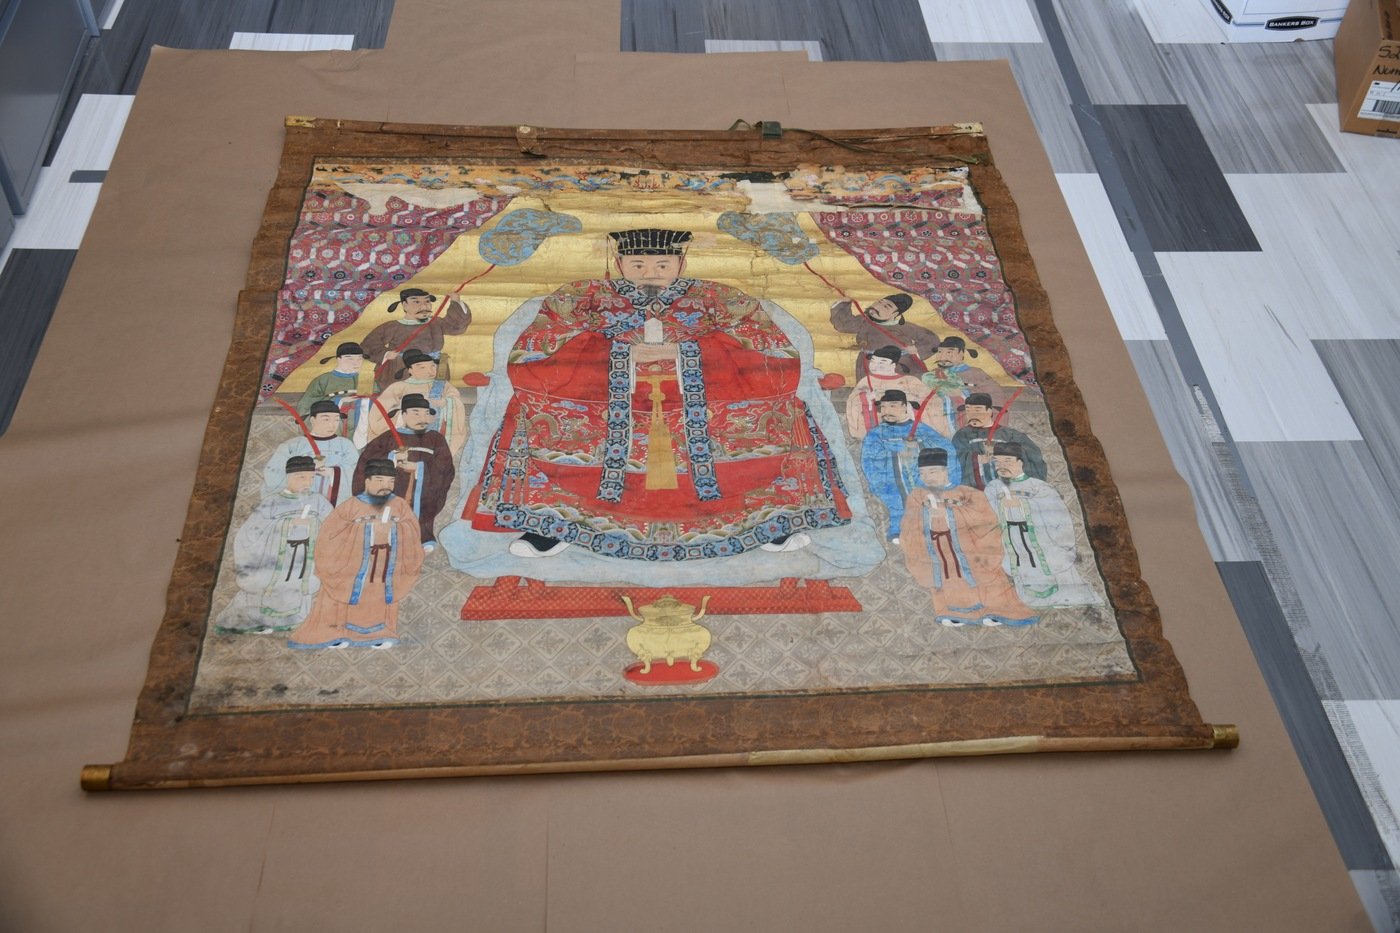 The FBI Boston Division has recovered 22 historic artifacts that were looted following the Battle of Okinawa and has orchestrated their return to the Government of Japan, Okinawa Prefecture. These artifacts had been missing for almost 80 years.